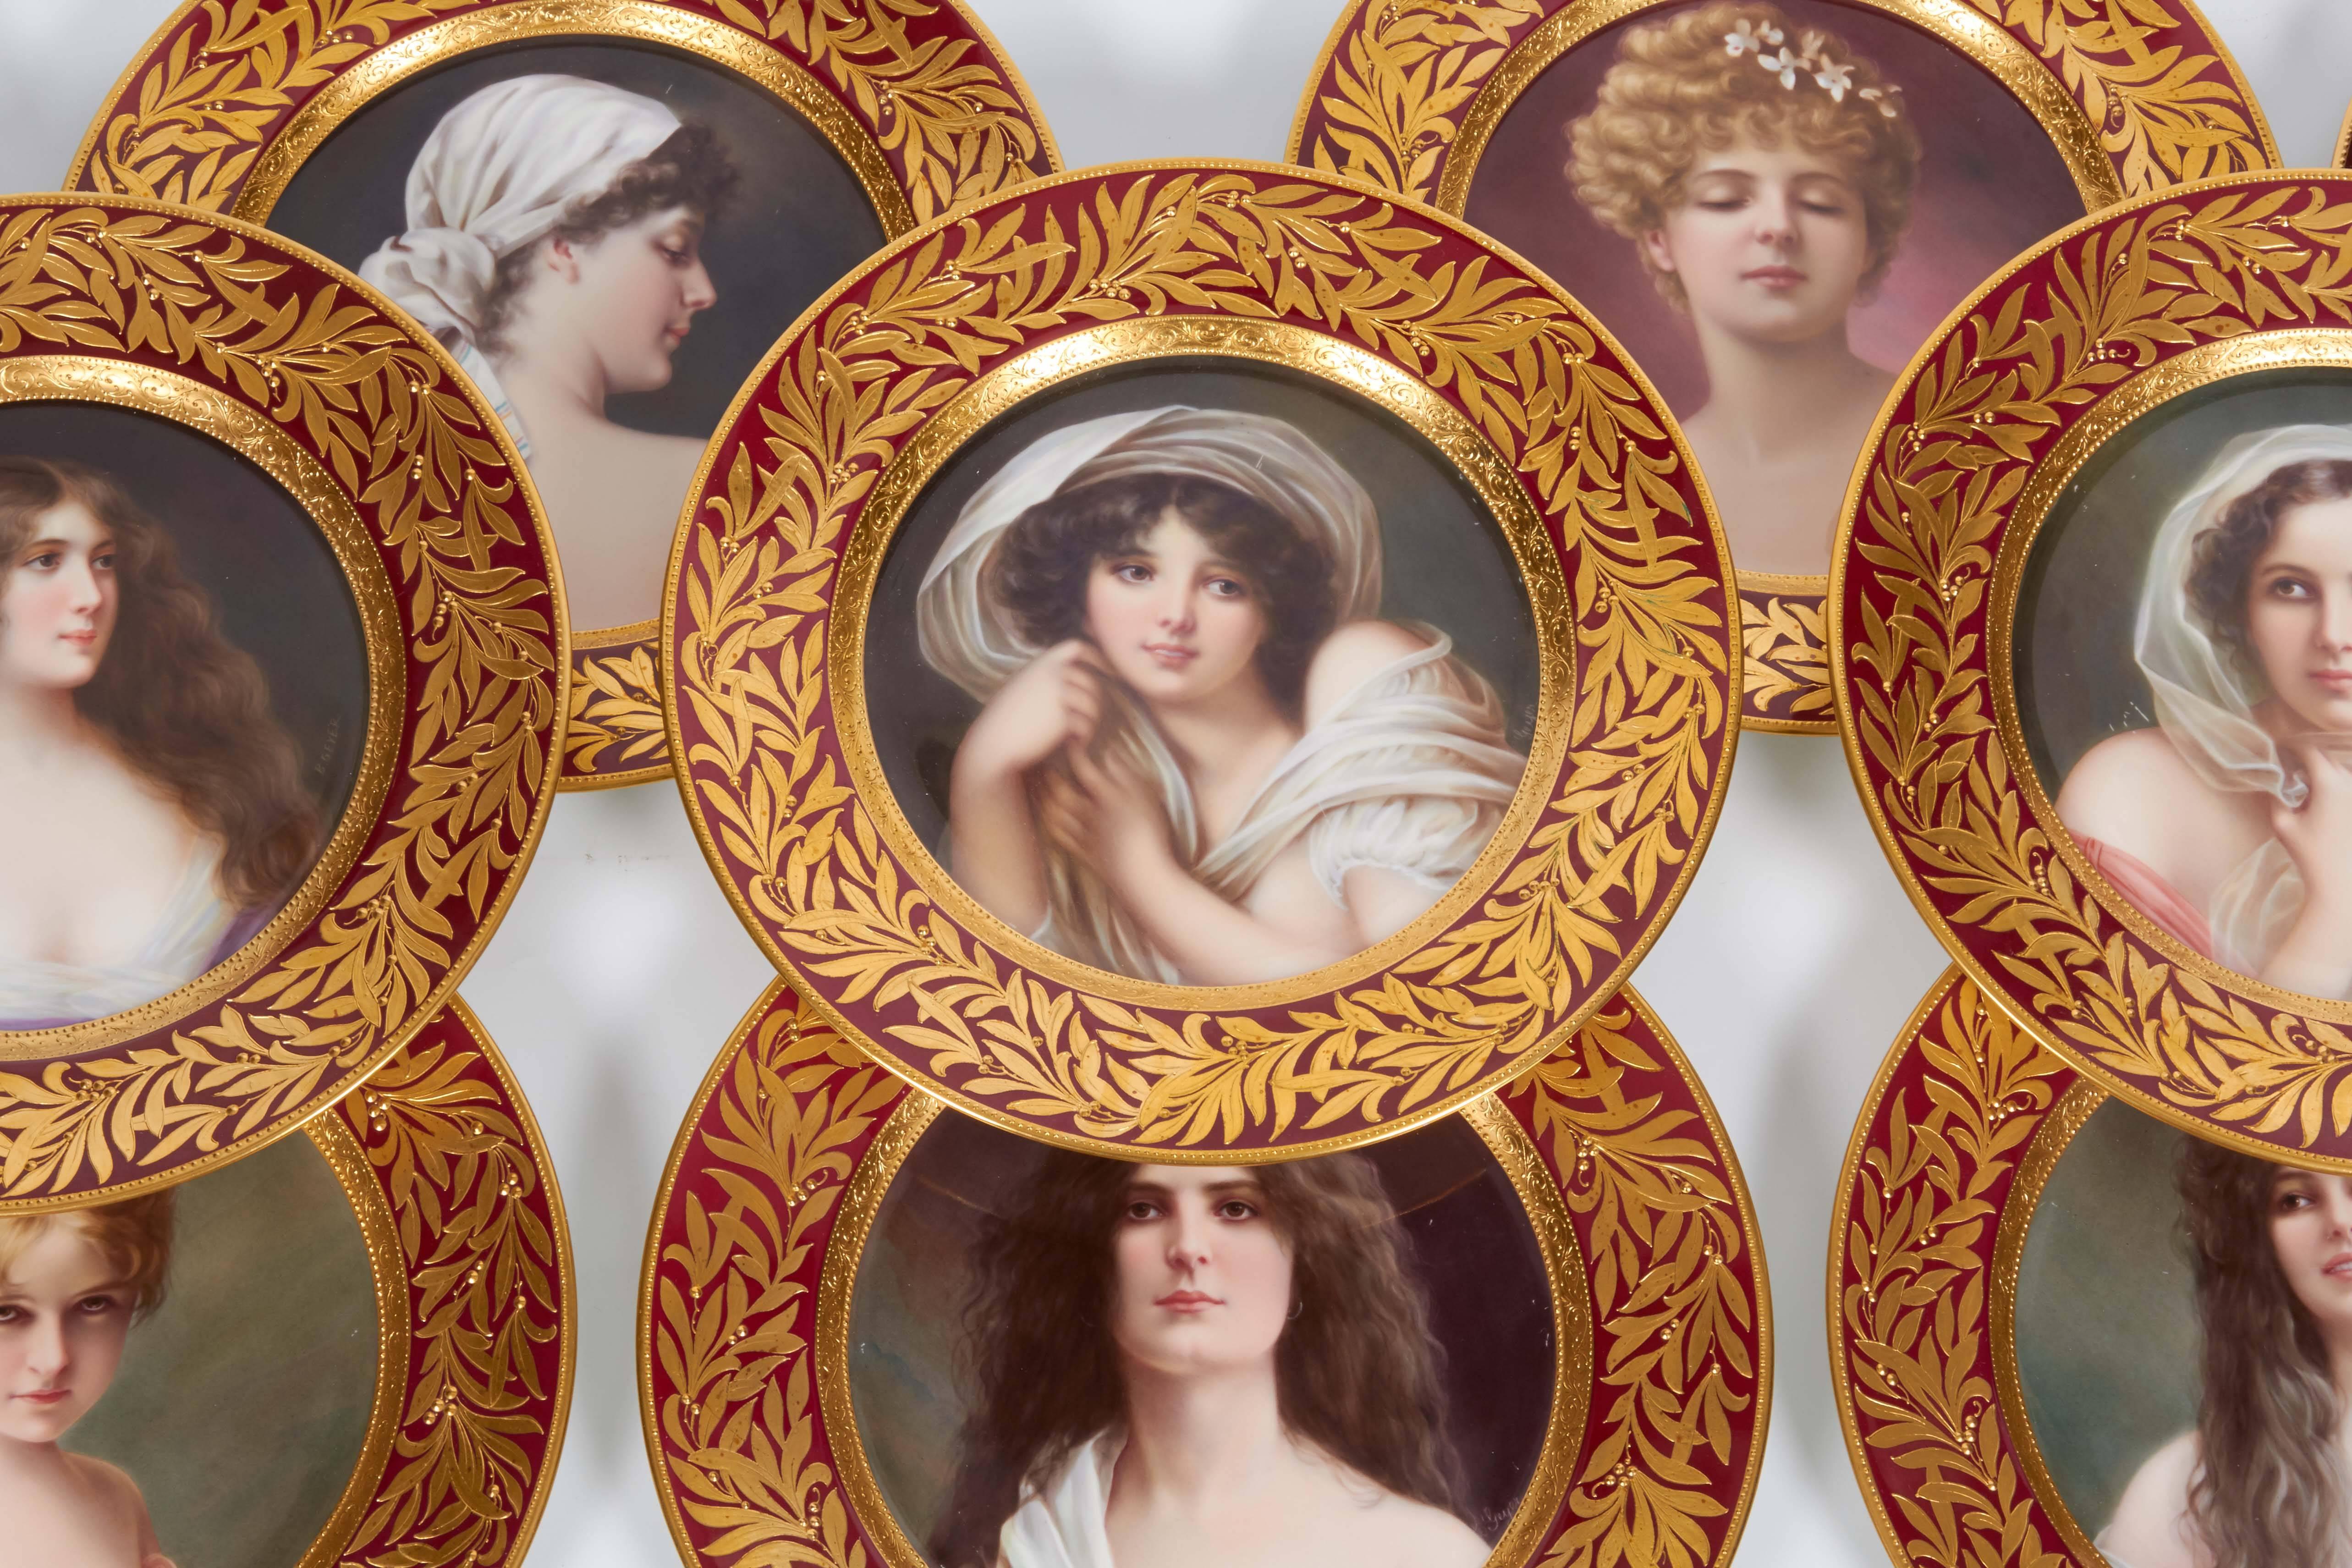 A complete and original set of 12 American, Transitional Ceramic Art Company/Lenox Porcelain, Vienna Style Burgundy-Ground Portrait Plates,
1904-1905, gilt CAC monogram and wreath, gilt and impressed uppercase marks, retailer's mark for Tiffany &